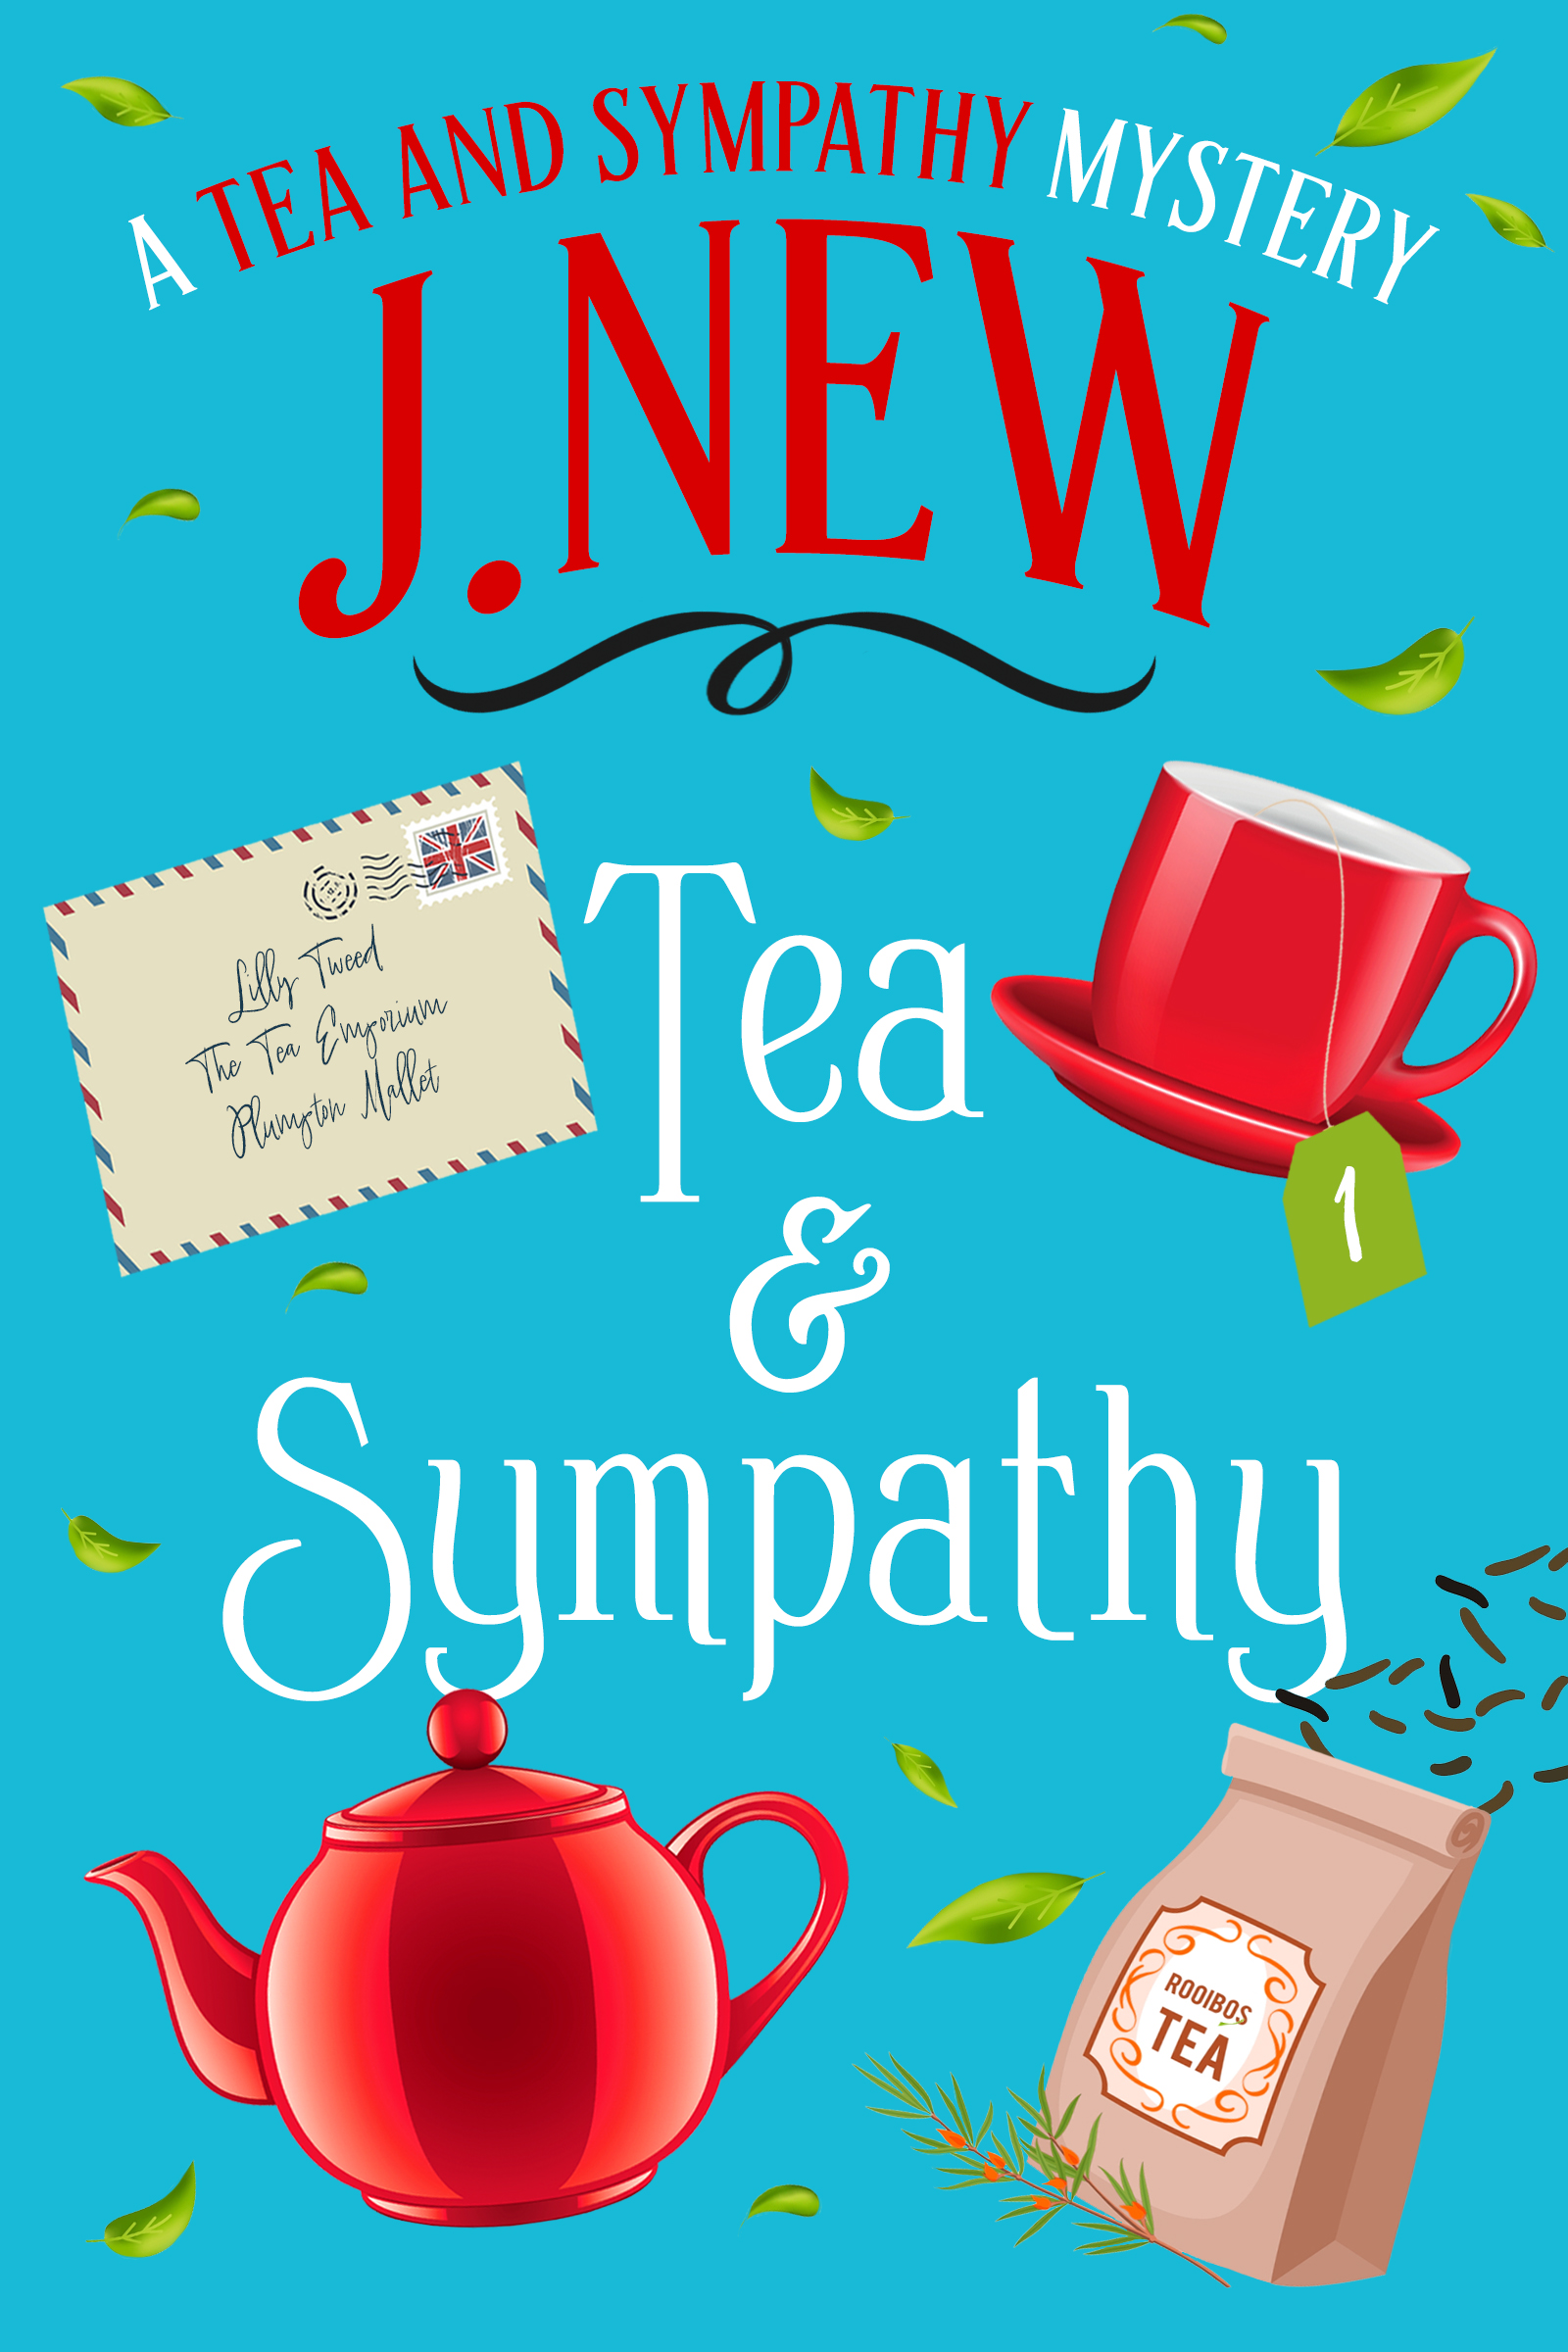 Tea and Sympathy is the popular first book in the British cozy culinary mystery series by author J. New